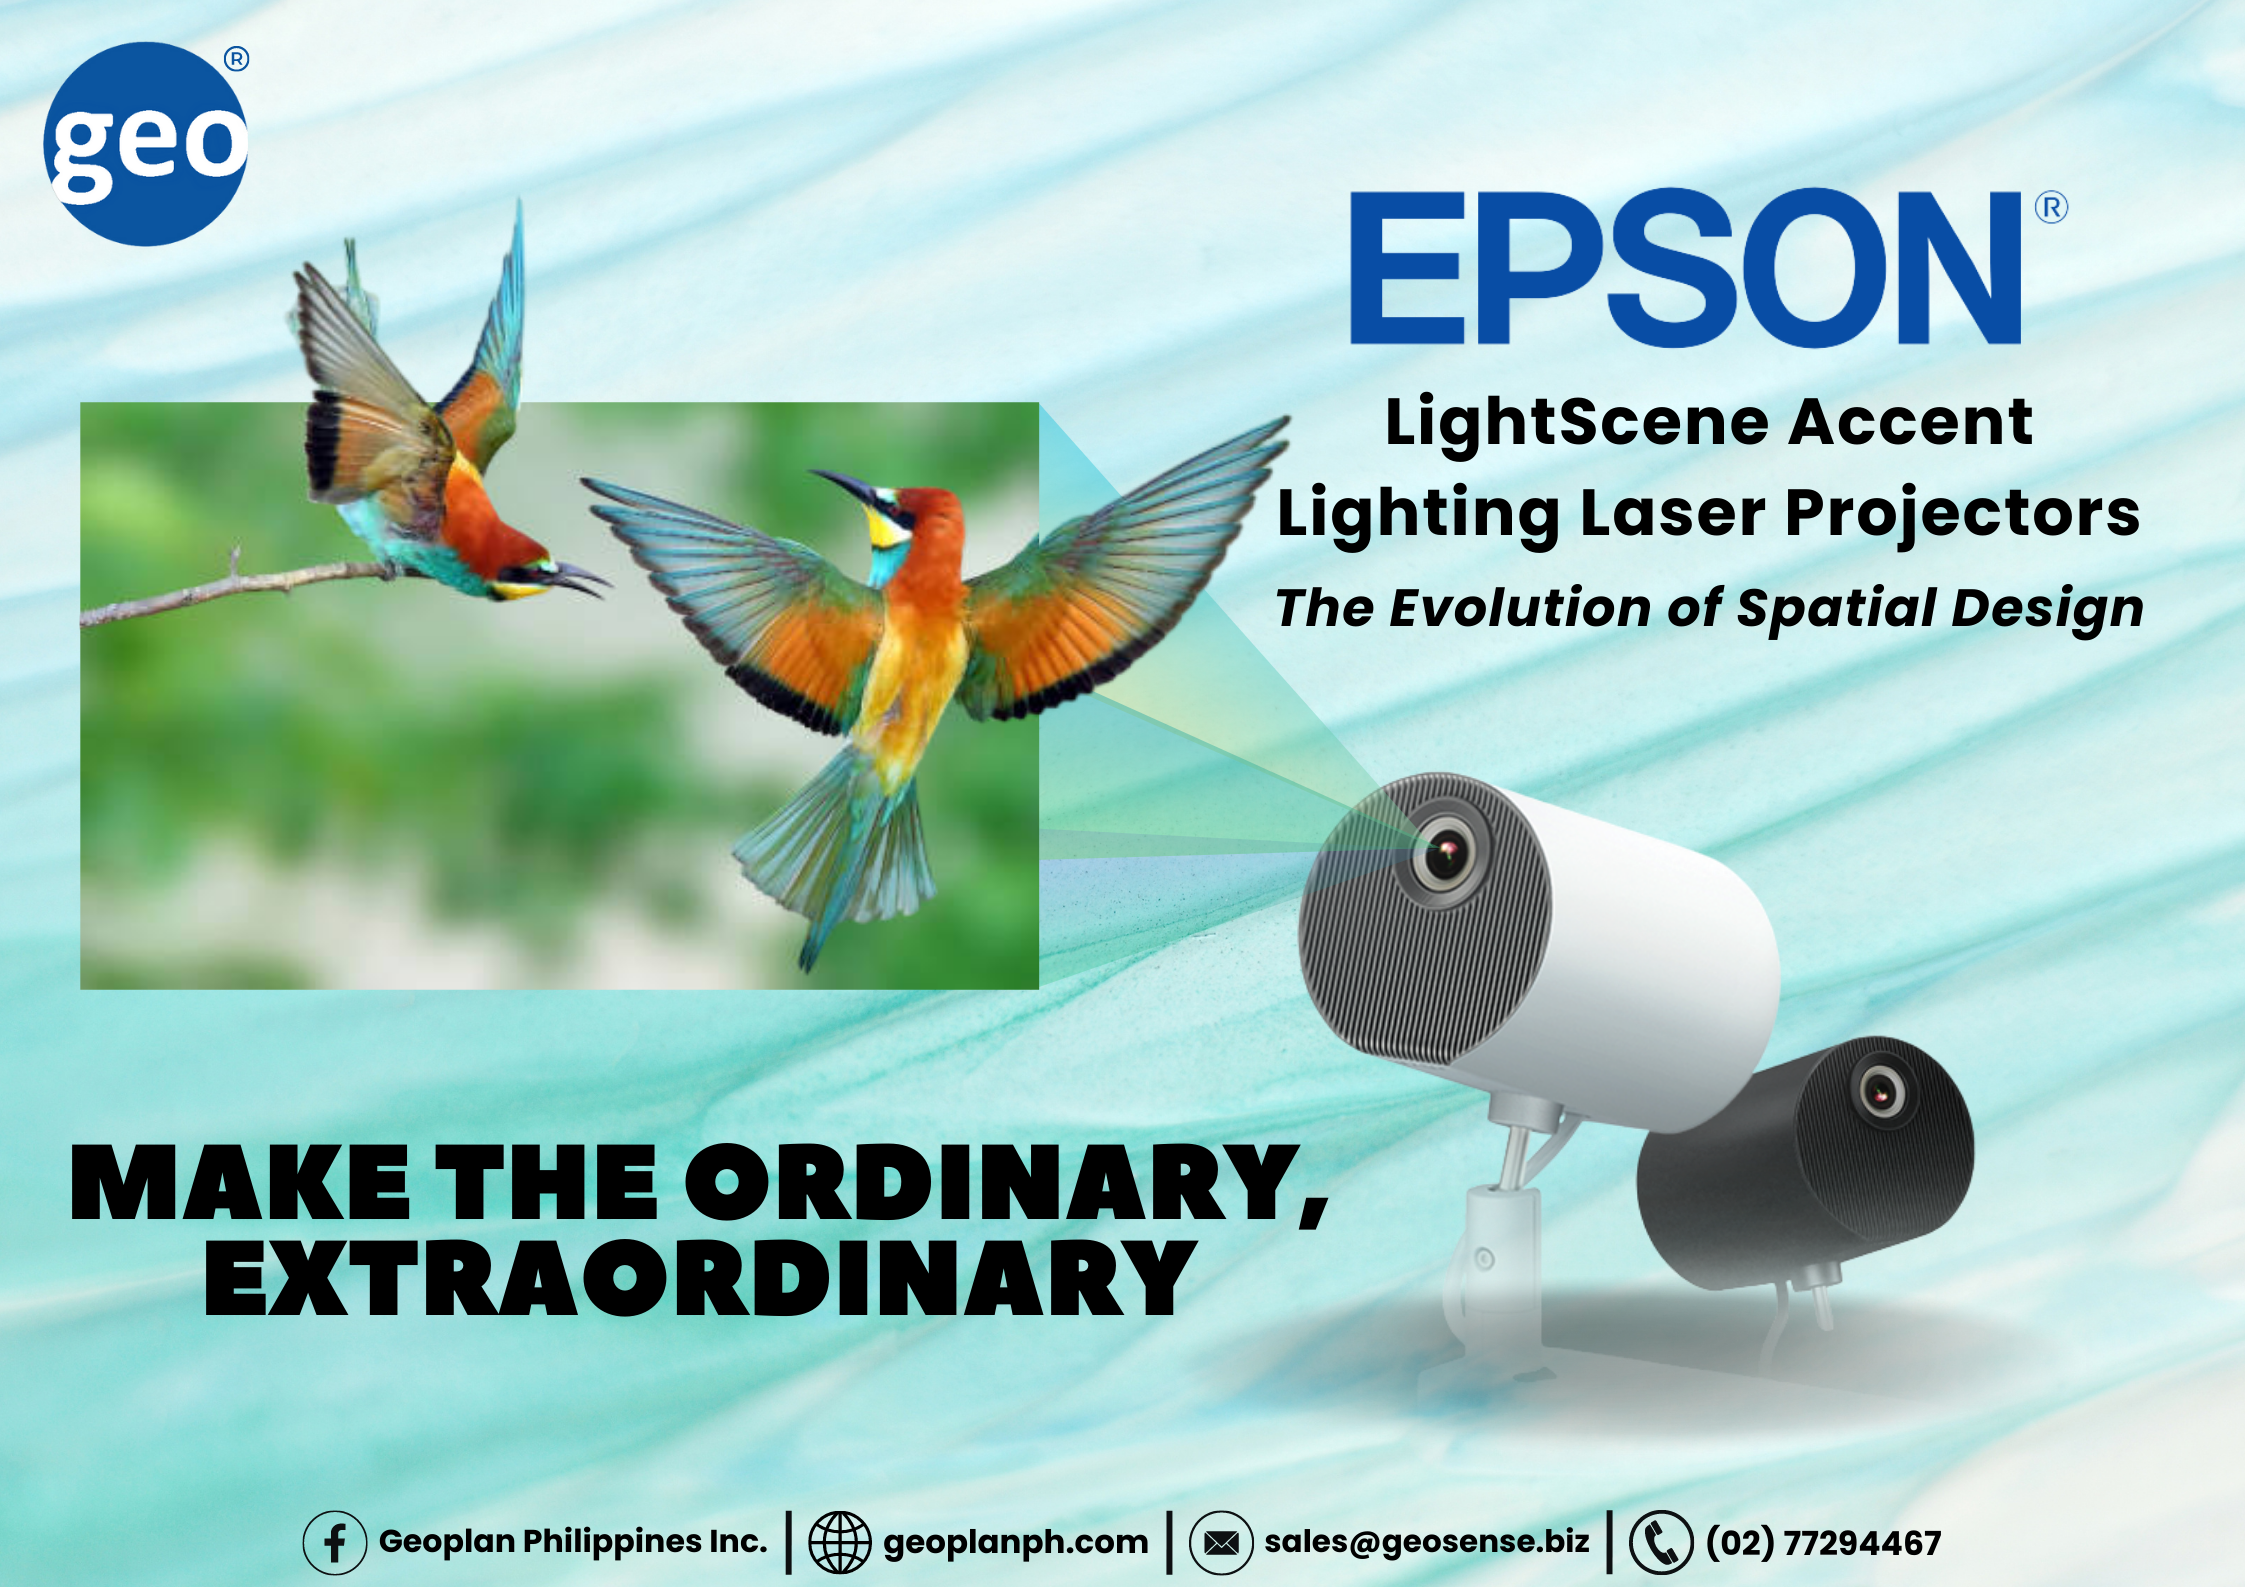 EPSON: LightScene Projector- Creating Ordinary Spaces Into Beautiful Environments